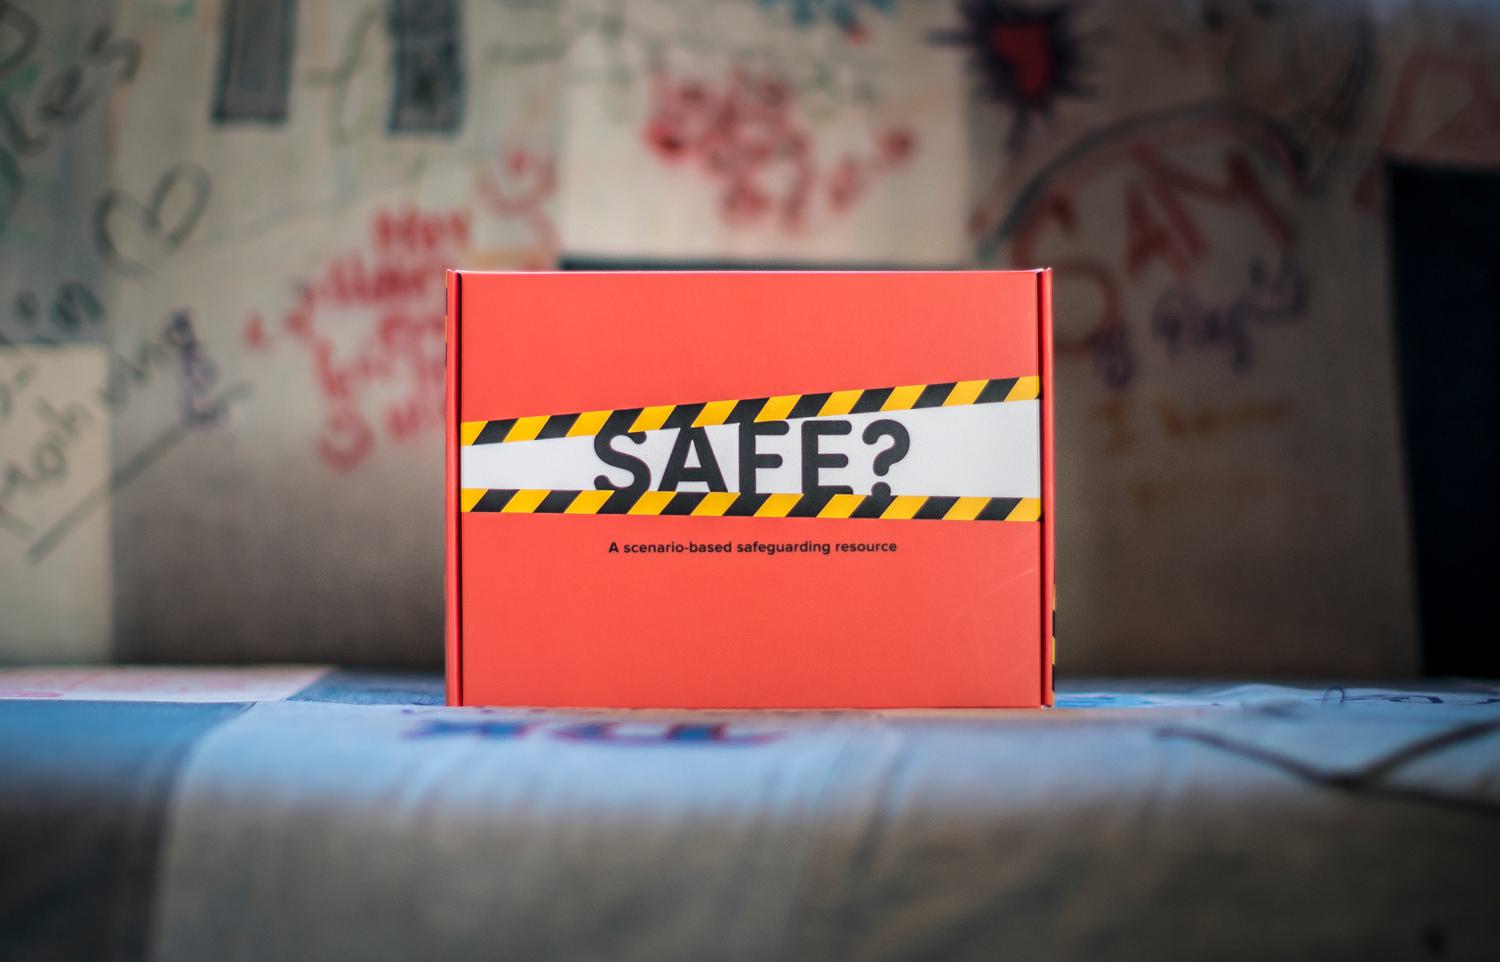 Safe? A new approach to safeguarding case studies